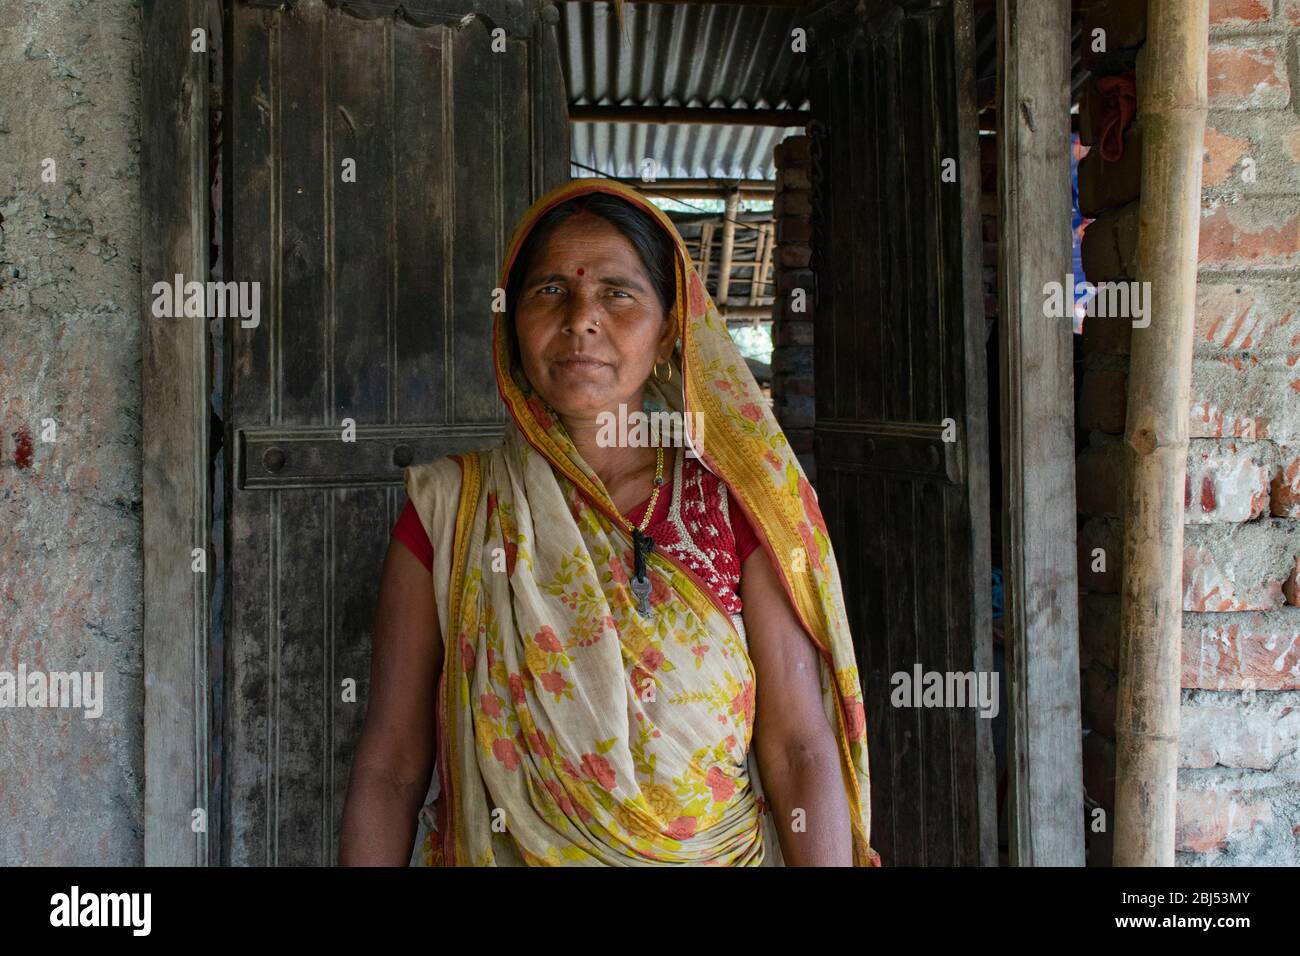 portrait of rural woman, India Stock Photo